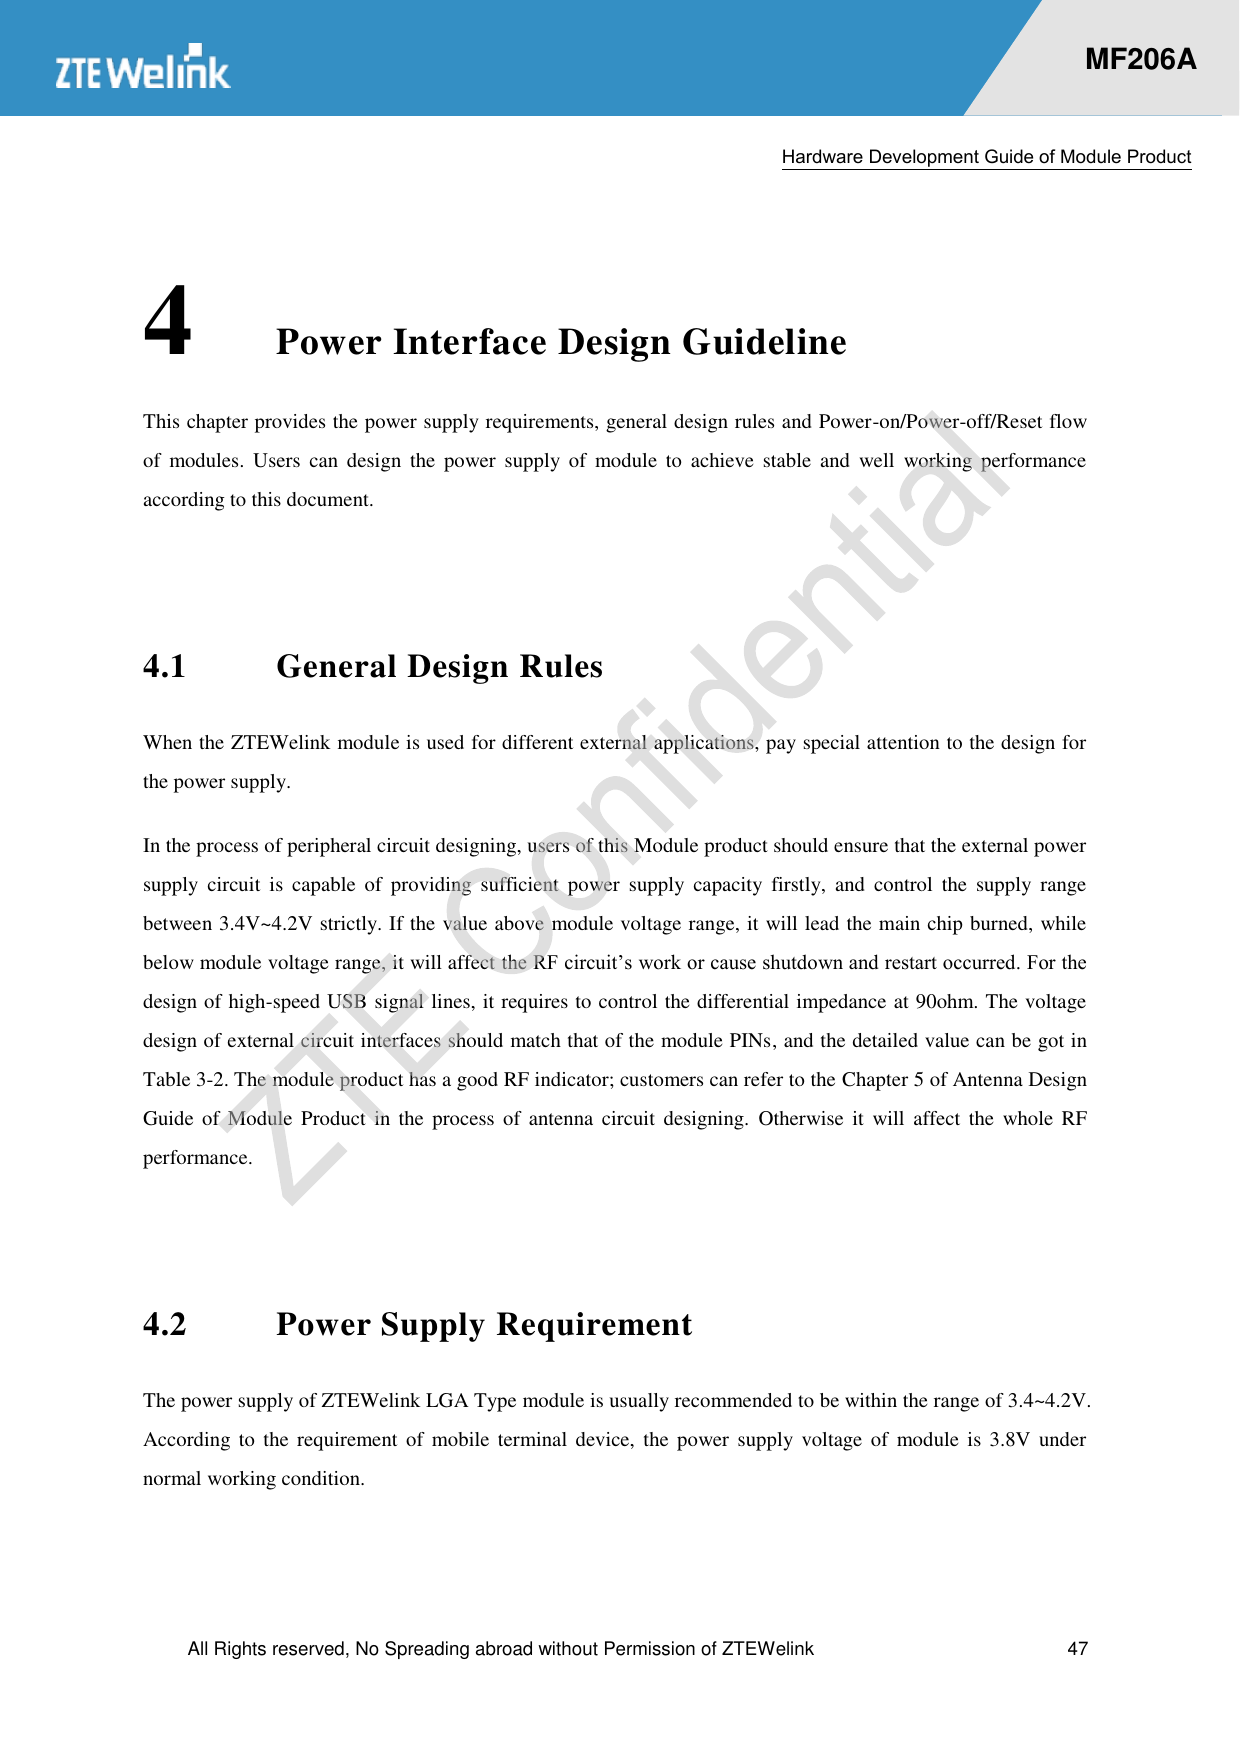  Hardware Development Guide of Module Product  All Rights reserved, No Spreading abroad without Permission of ZTEWelink  47    MF206A 4 Power Interface Design Guideline This chapter provides the power supply requirements, general design rules and Power-on/Power-off/Reset flow of  modules.  Users  can  design  the  power  supply  of  module  to  achieve  stable  and  well  working  performance according to this document.    4.1 General Design Rules When the ZTEWelink module is used for different external applications, pay special attention to the design for the power supply. In the process of peripheral circuit designing, users of this Module product should ensure that the external power supply  circuit  is  capable  of  providing  sufficient  power  supply  capacity  firstly,  and  control  the  supply  range between 3.4V~4.2V strictly. If the value above module voltage range, it will lead the main chip burned, while below module voltage range, it will affect the RF circuit’s work or cause shutdown and restart occurred. For the design of high-speed USB signal lines, it requires to control the differential impedance at 90ohm. The voltage design of external circuit interfaces should match that of the module PINs, and the detailed value can be got in Table 3-2. The module product has a good RF indicator; customers can refer to the Chapter 5 of Antenna Design Guide  of  Module  Product  in  the  process  of  antenna  circuit  designing.  Otherwise  it  will  affect  the  whole  RF performance.    4.2 Power Supply Requirement The power supply of ZTEWelink LGA Type module is usually recommended to be within the range of 3.4~4.2V. According to the requirement  of  mobile  terminal  device,  the power  supply  voltage  of  module  is  3.8V  under normal working condition.  